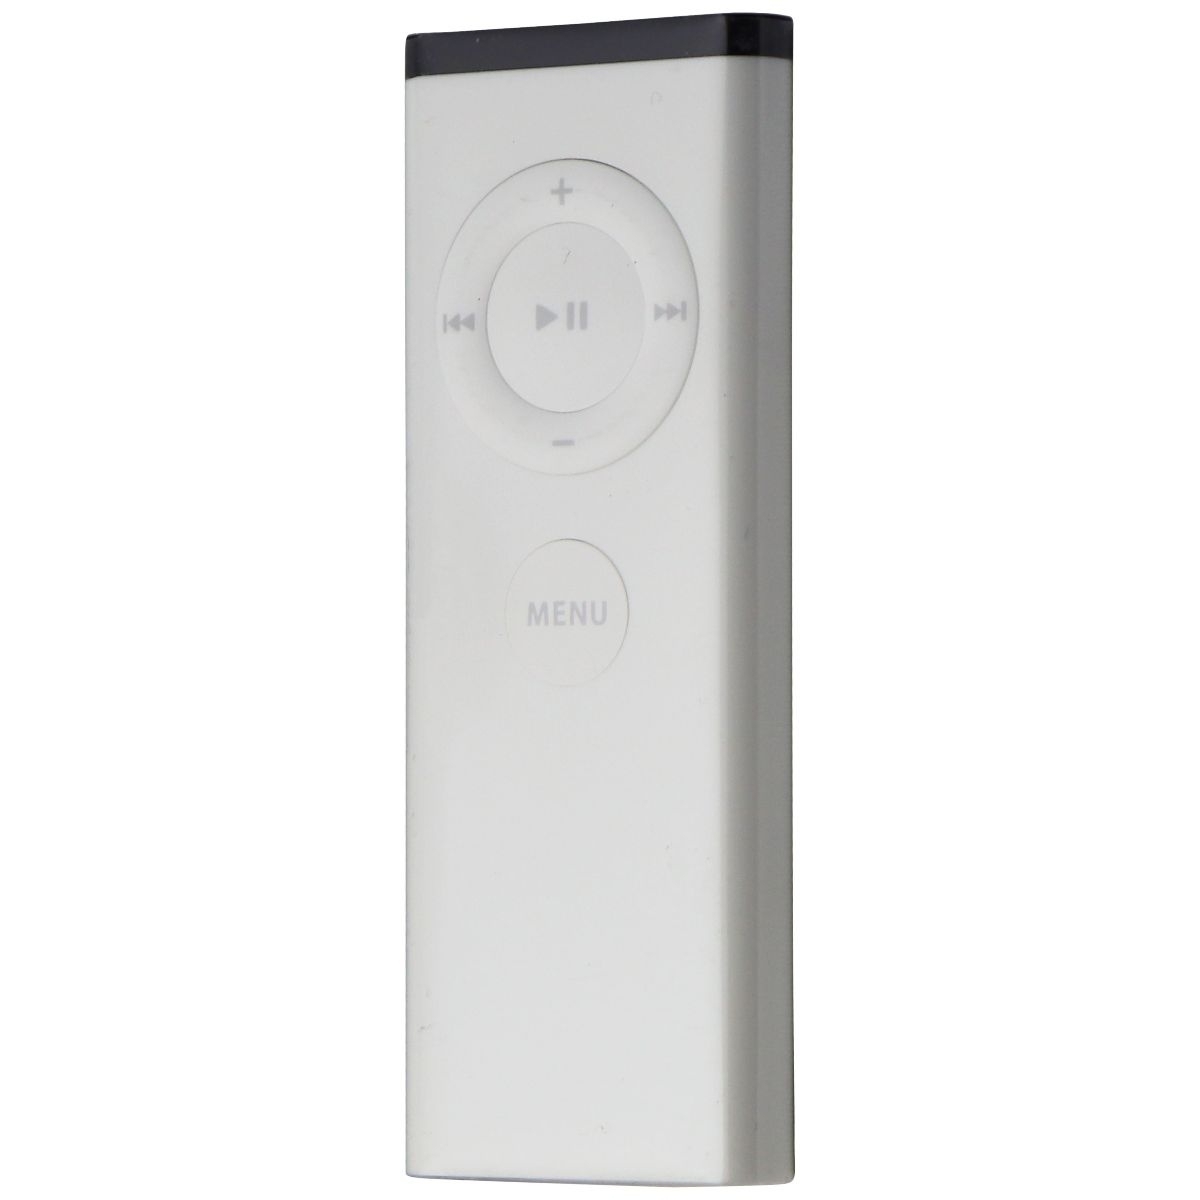 Apple TV 1st Gen Remote For Apple TV, IMac, And Select Macbooks - White (A1156)